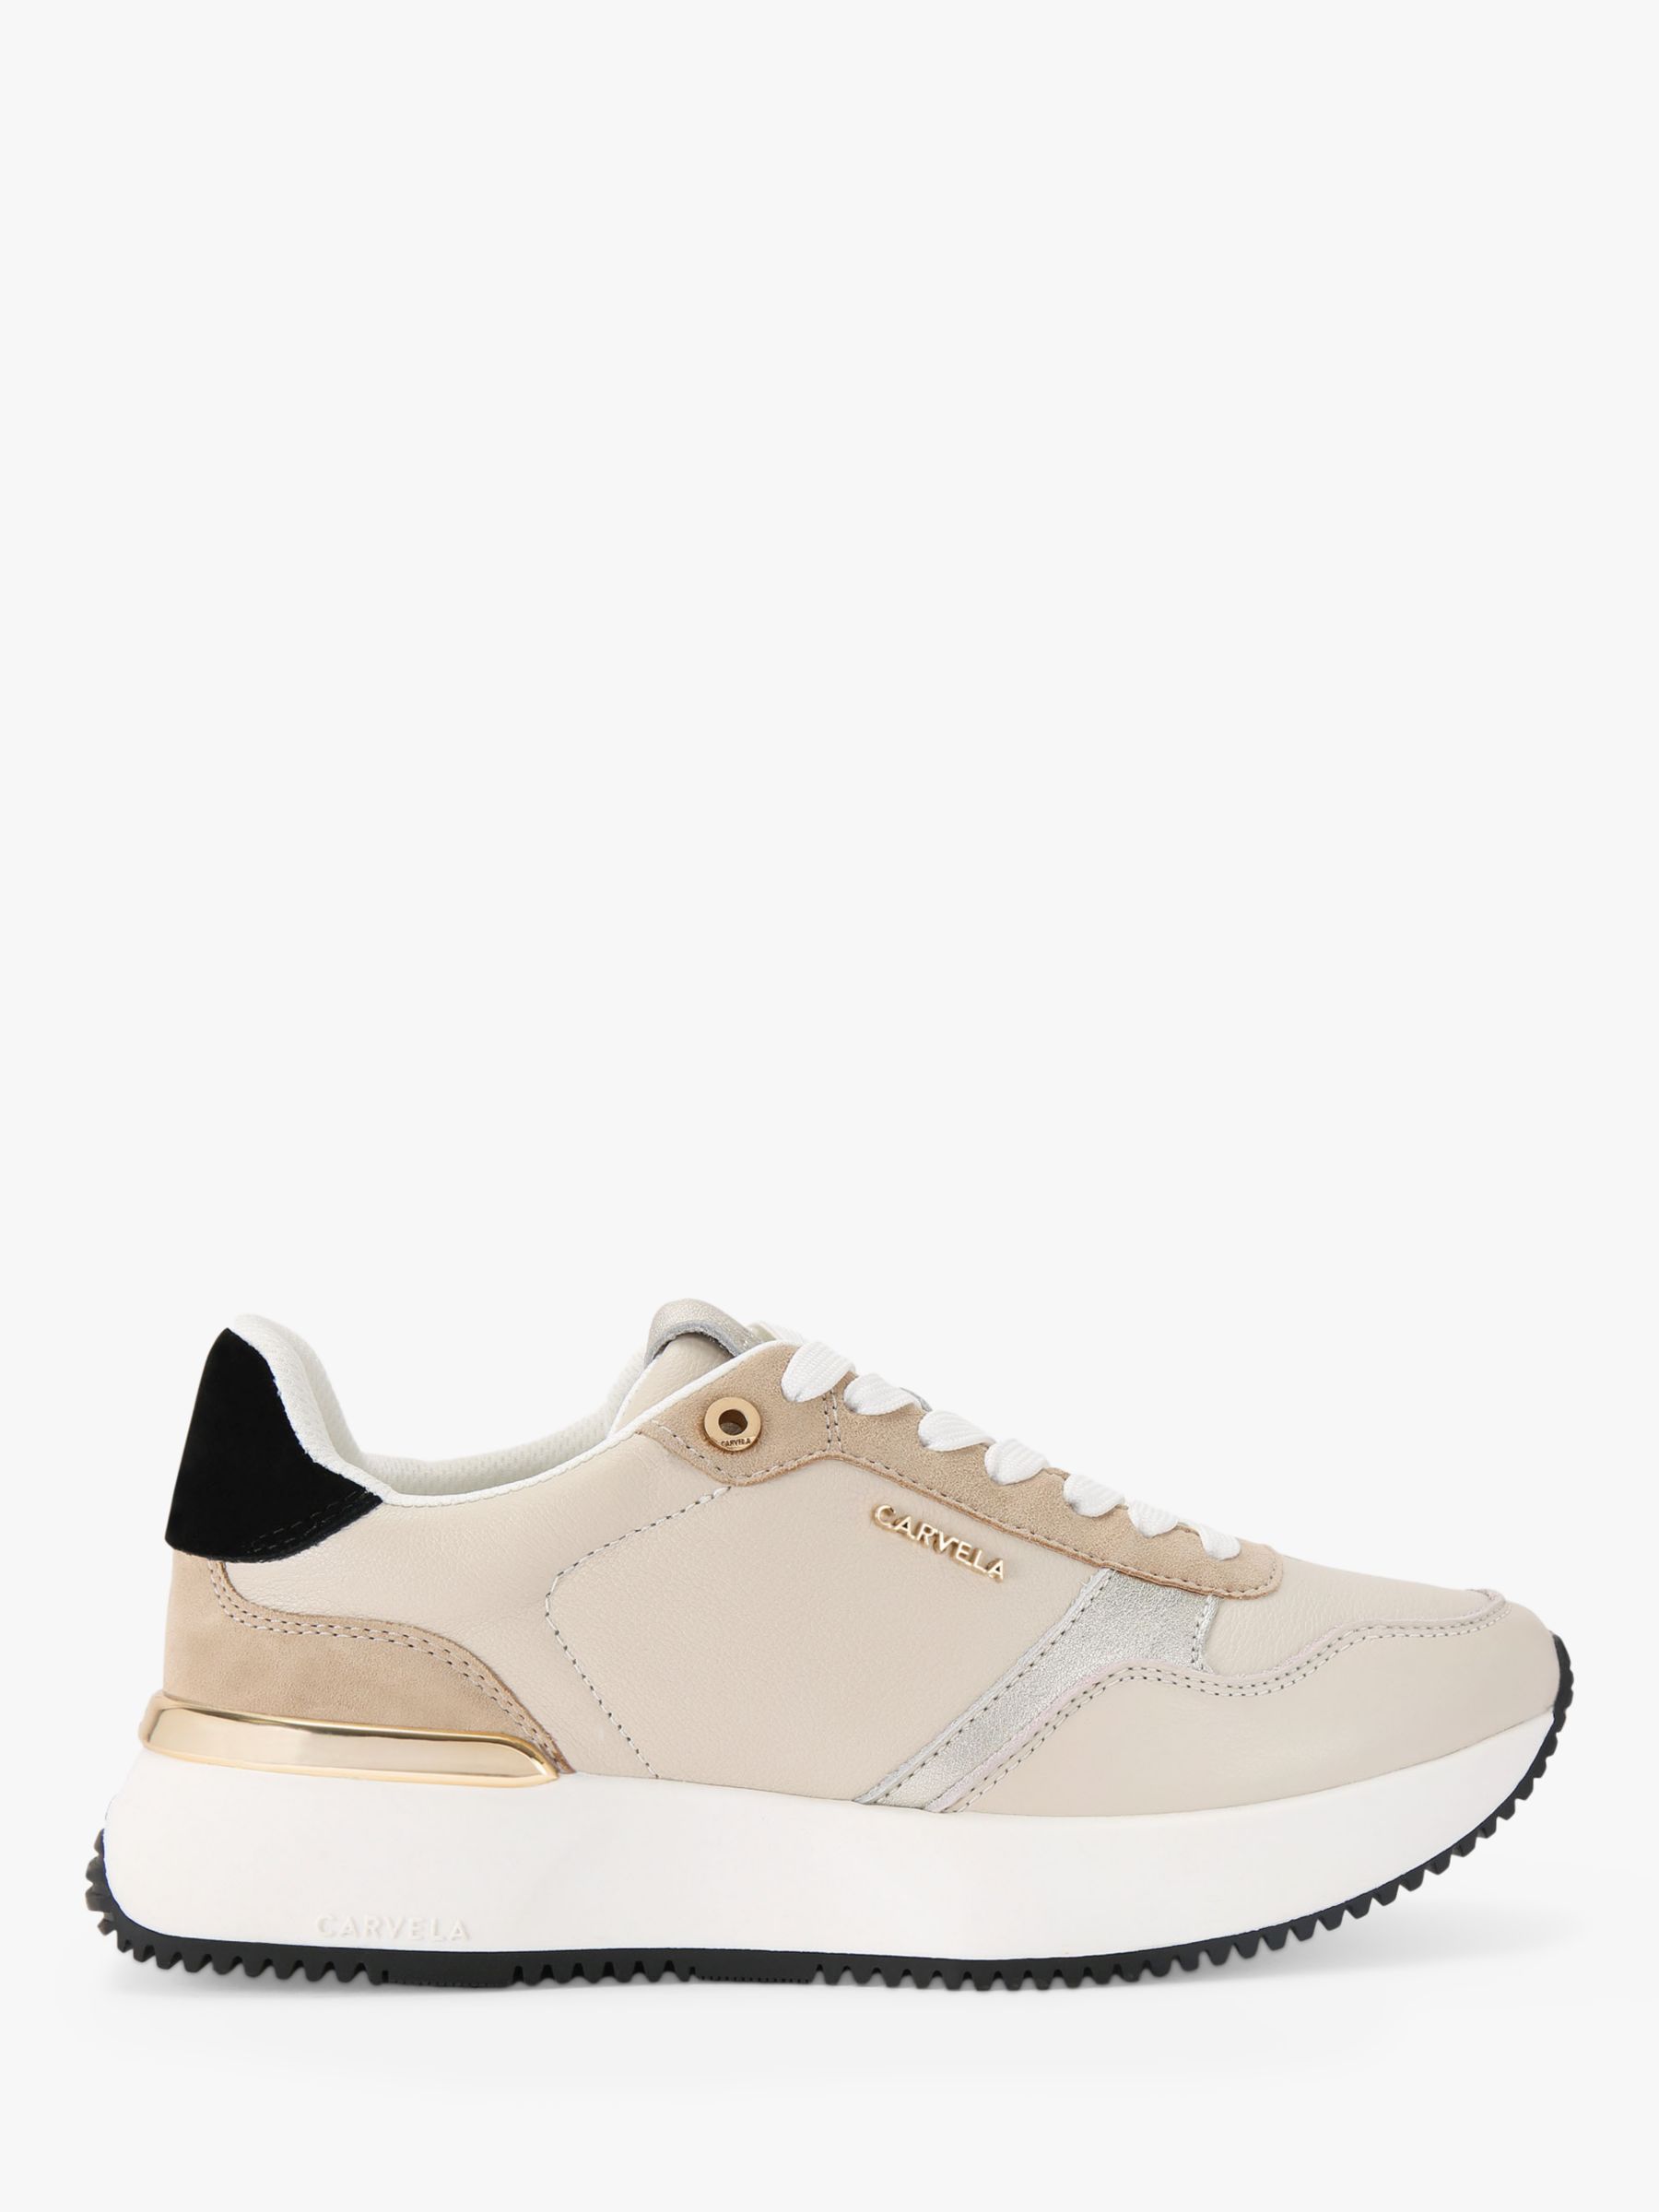 Carvela Flare Leather Trainers, Neutral at John Lewis & Partners